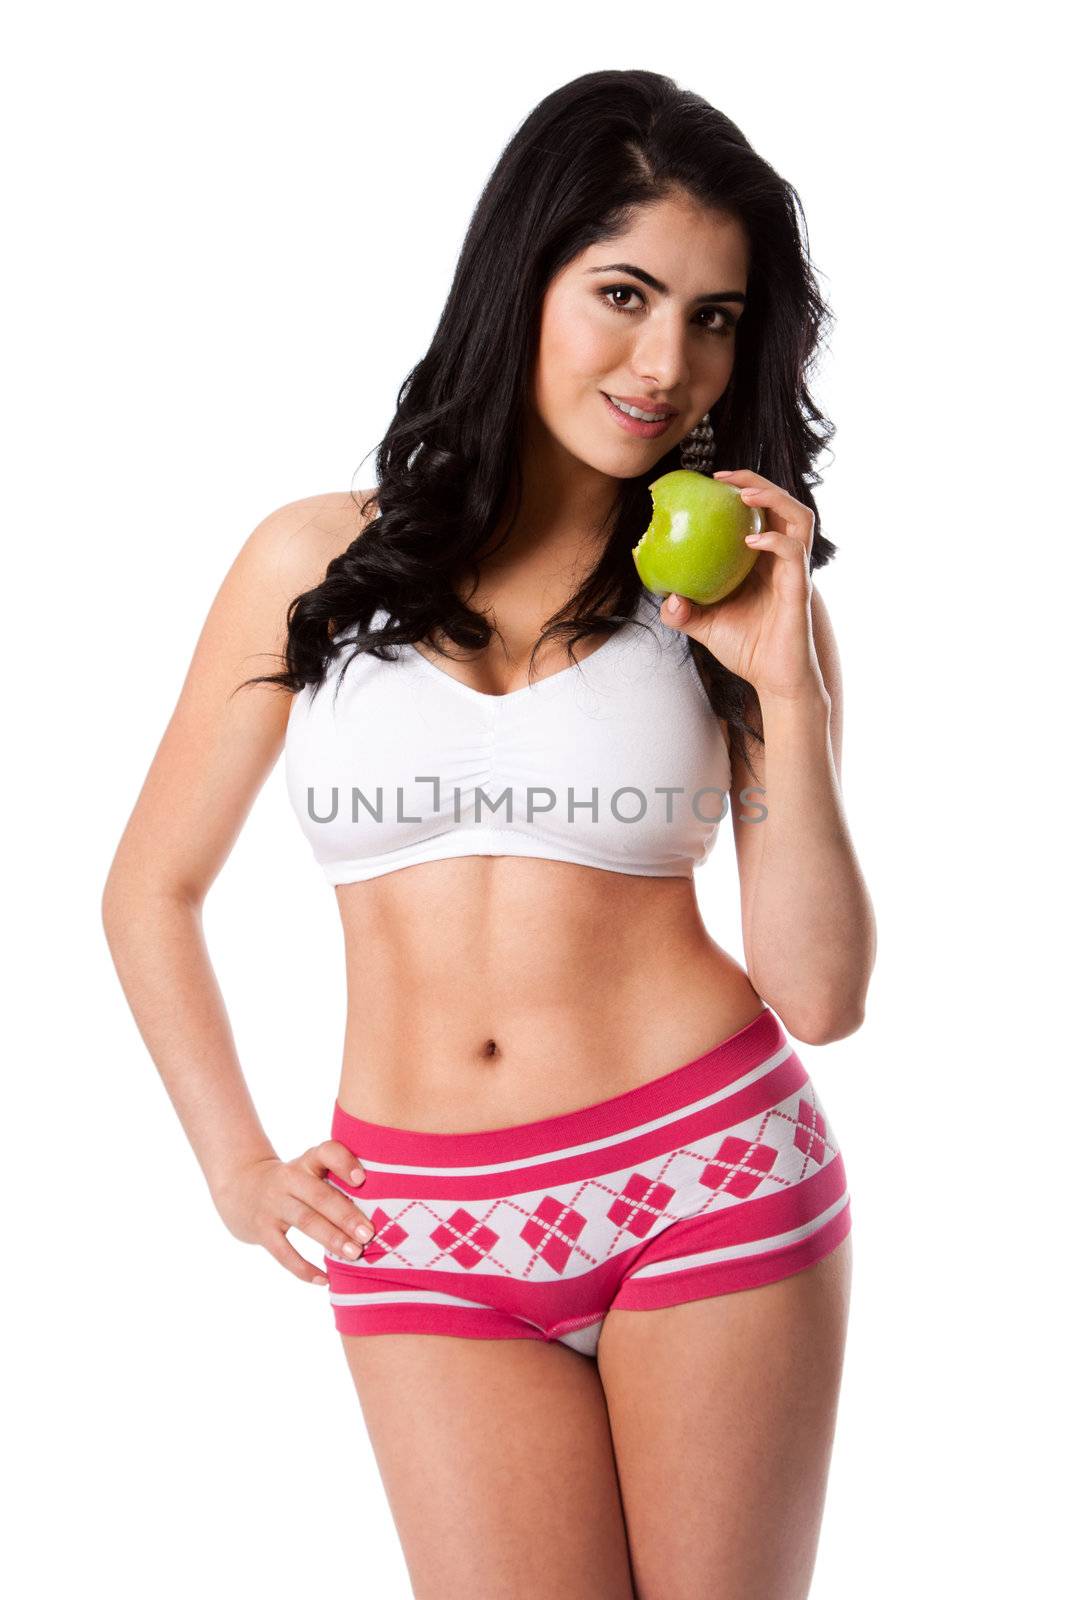 Beautiful happy young woman fit slim in shape with apple for good health standing showing abs and body, weight conscious diet nutrition, isolated.